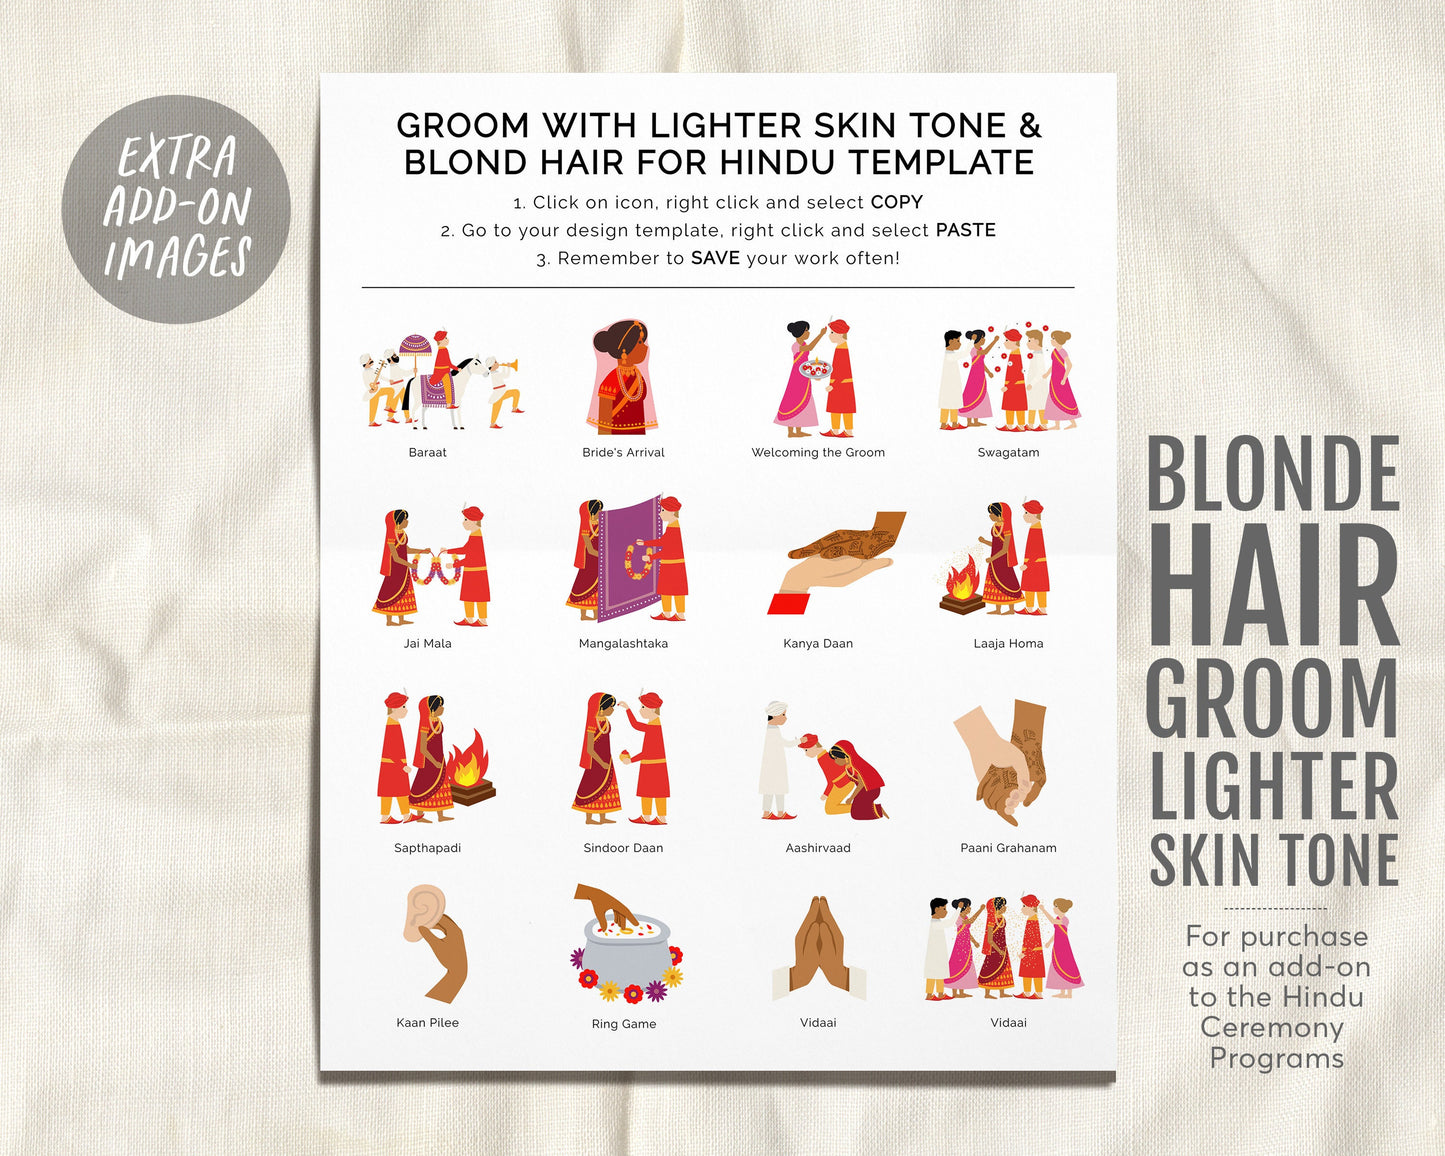 Blonde Hindu Groom With Lighter Skin Tone, Add-On Listing For The Hindu Ceremony Program